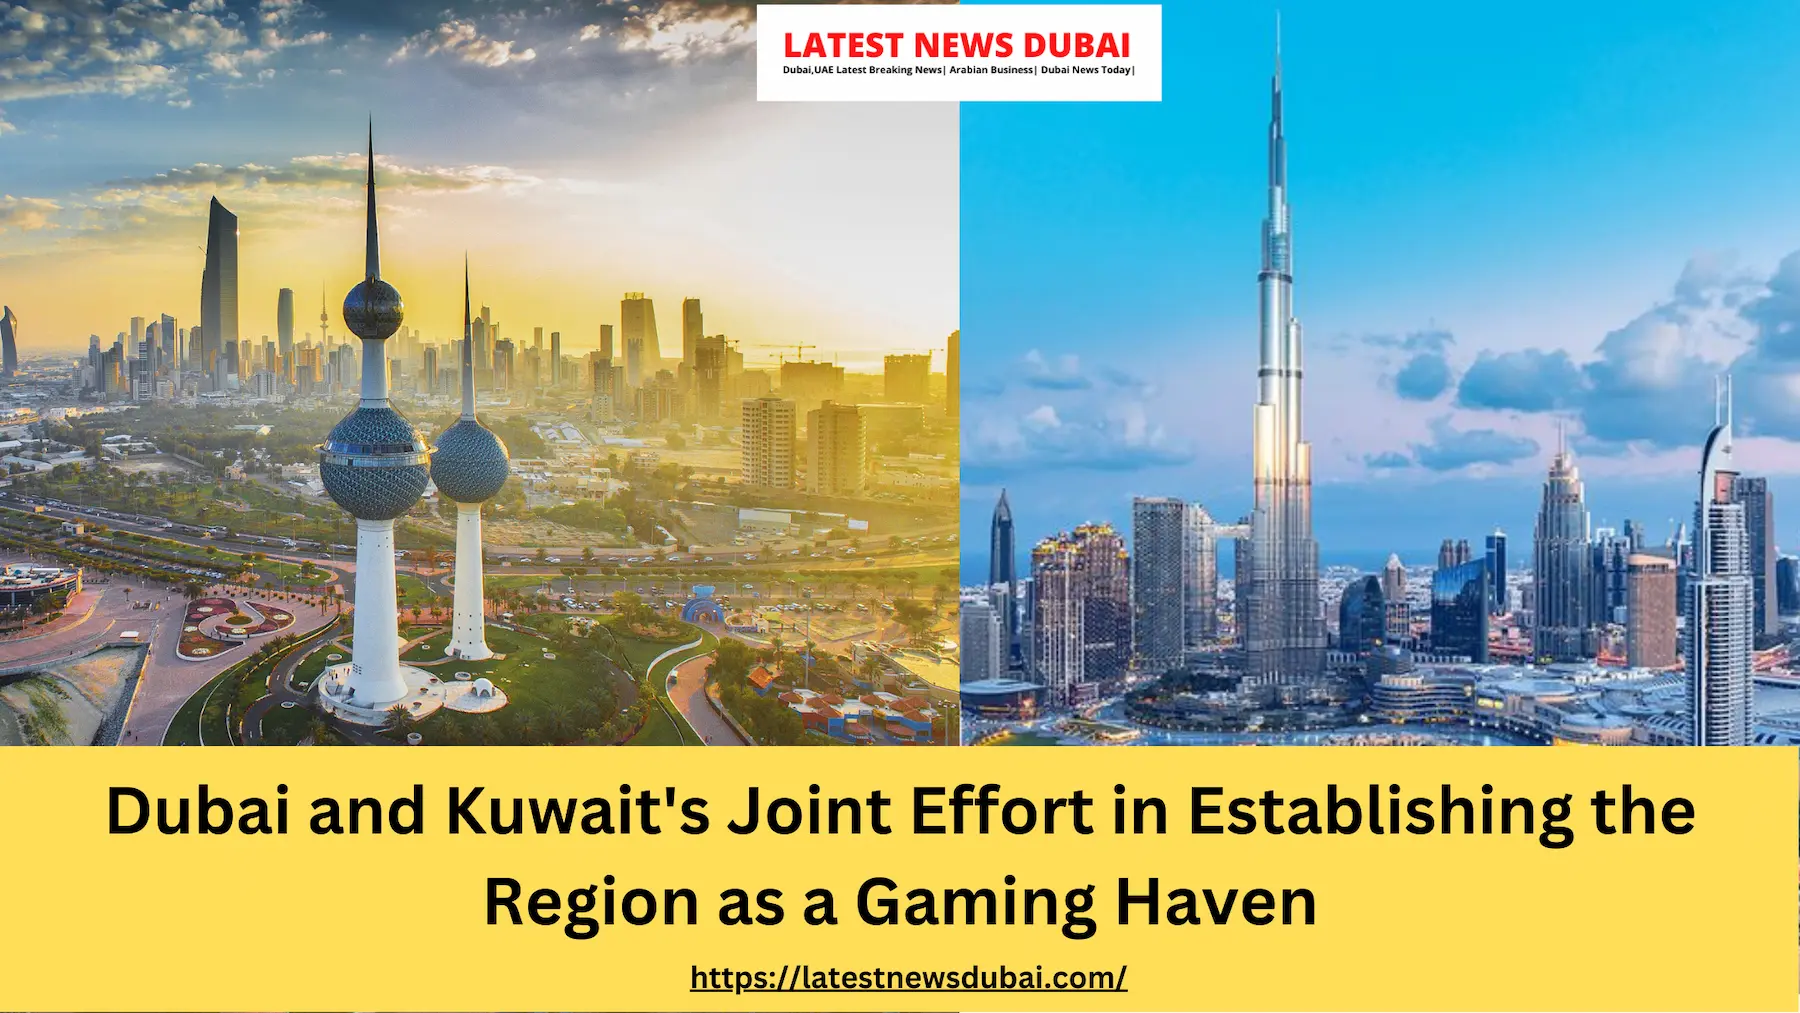 Dubai and Kuwait's Joint Effort in Establishing the Region as a Gaming Haven